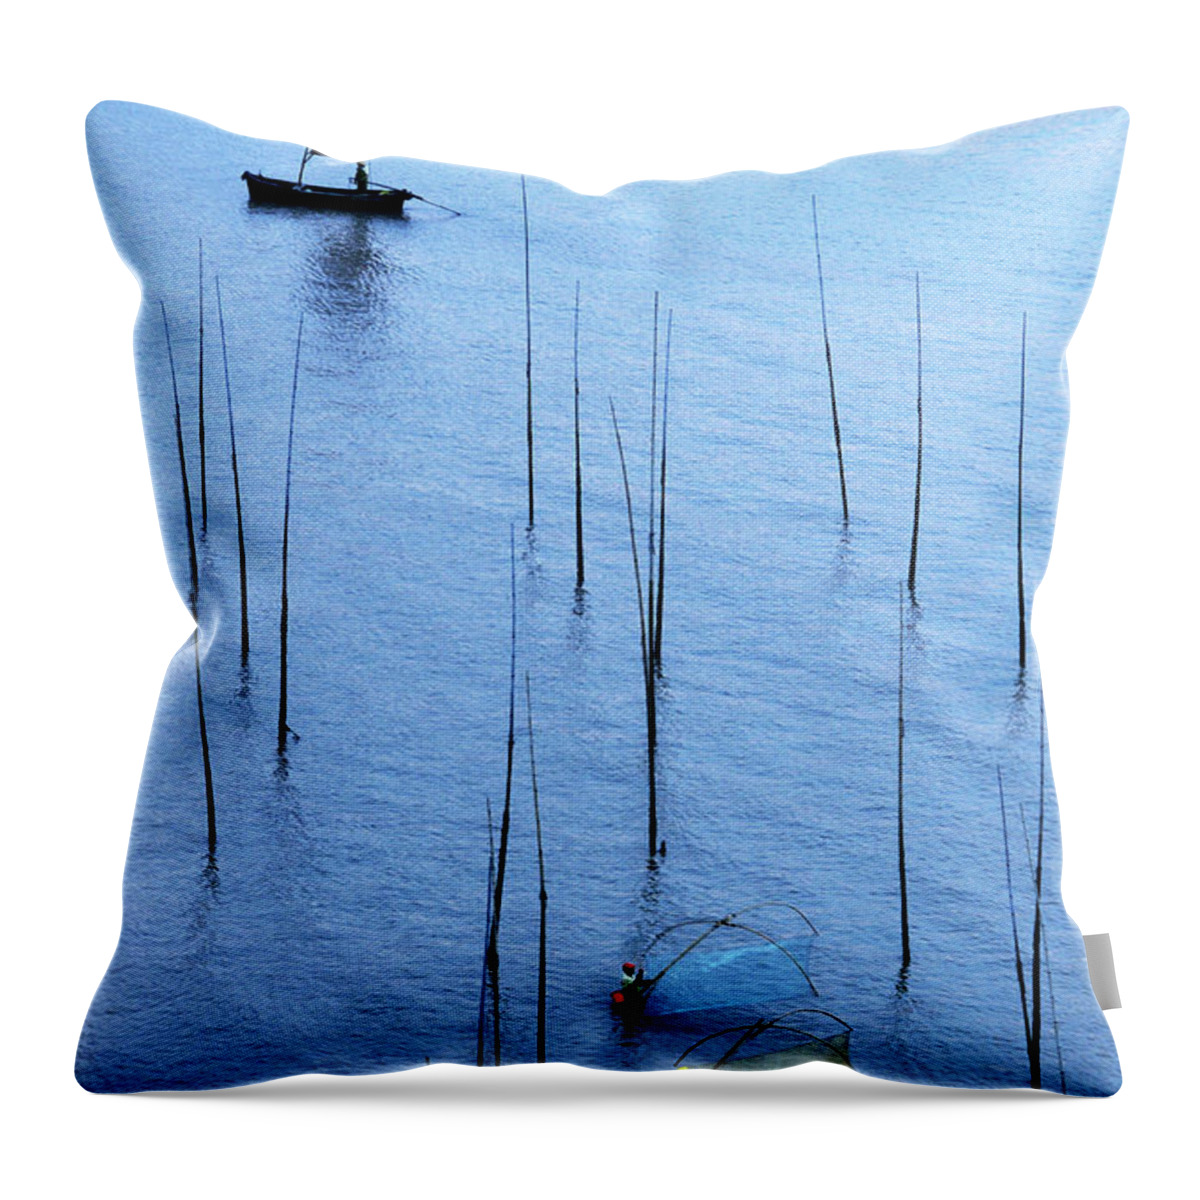 Working Throw Pillow featuring the photograph Fishermen Working In High-tide Mudflats by Melindachan